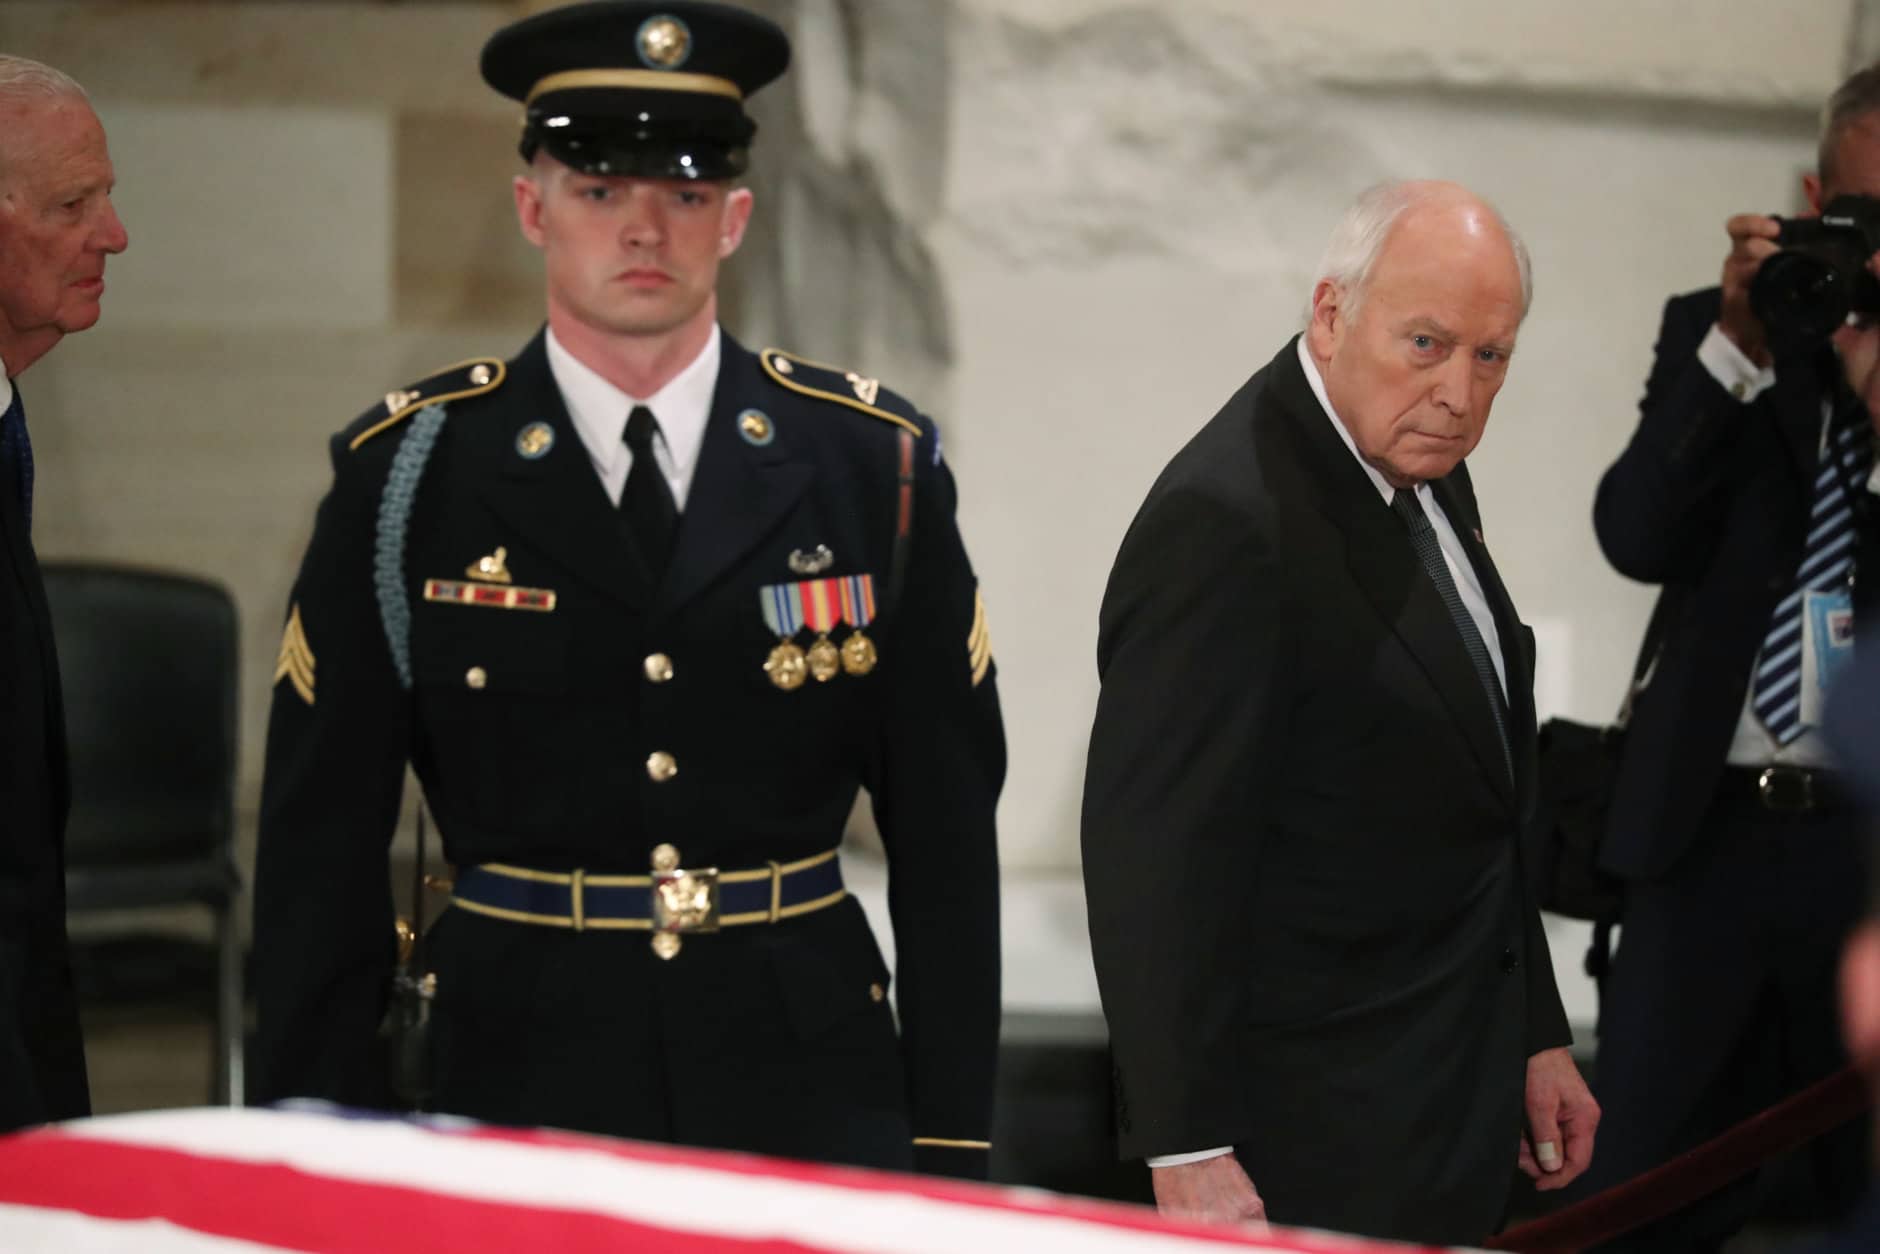 Former Vice President Dick Cheney walks past the casket of former President George H.W. Bush at the Capitol in Washington, Monday, Dec. 3, 2018. (Jonathan Ernst/Pool Photo via AP)